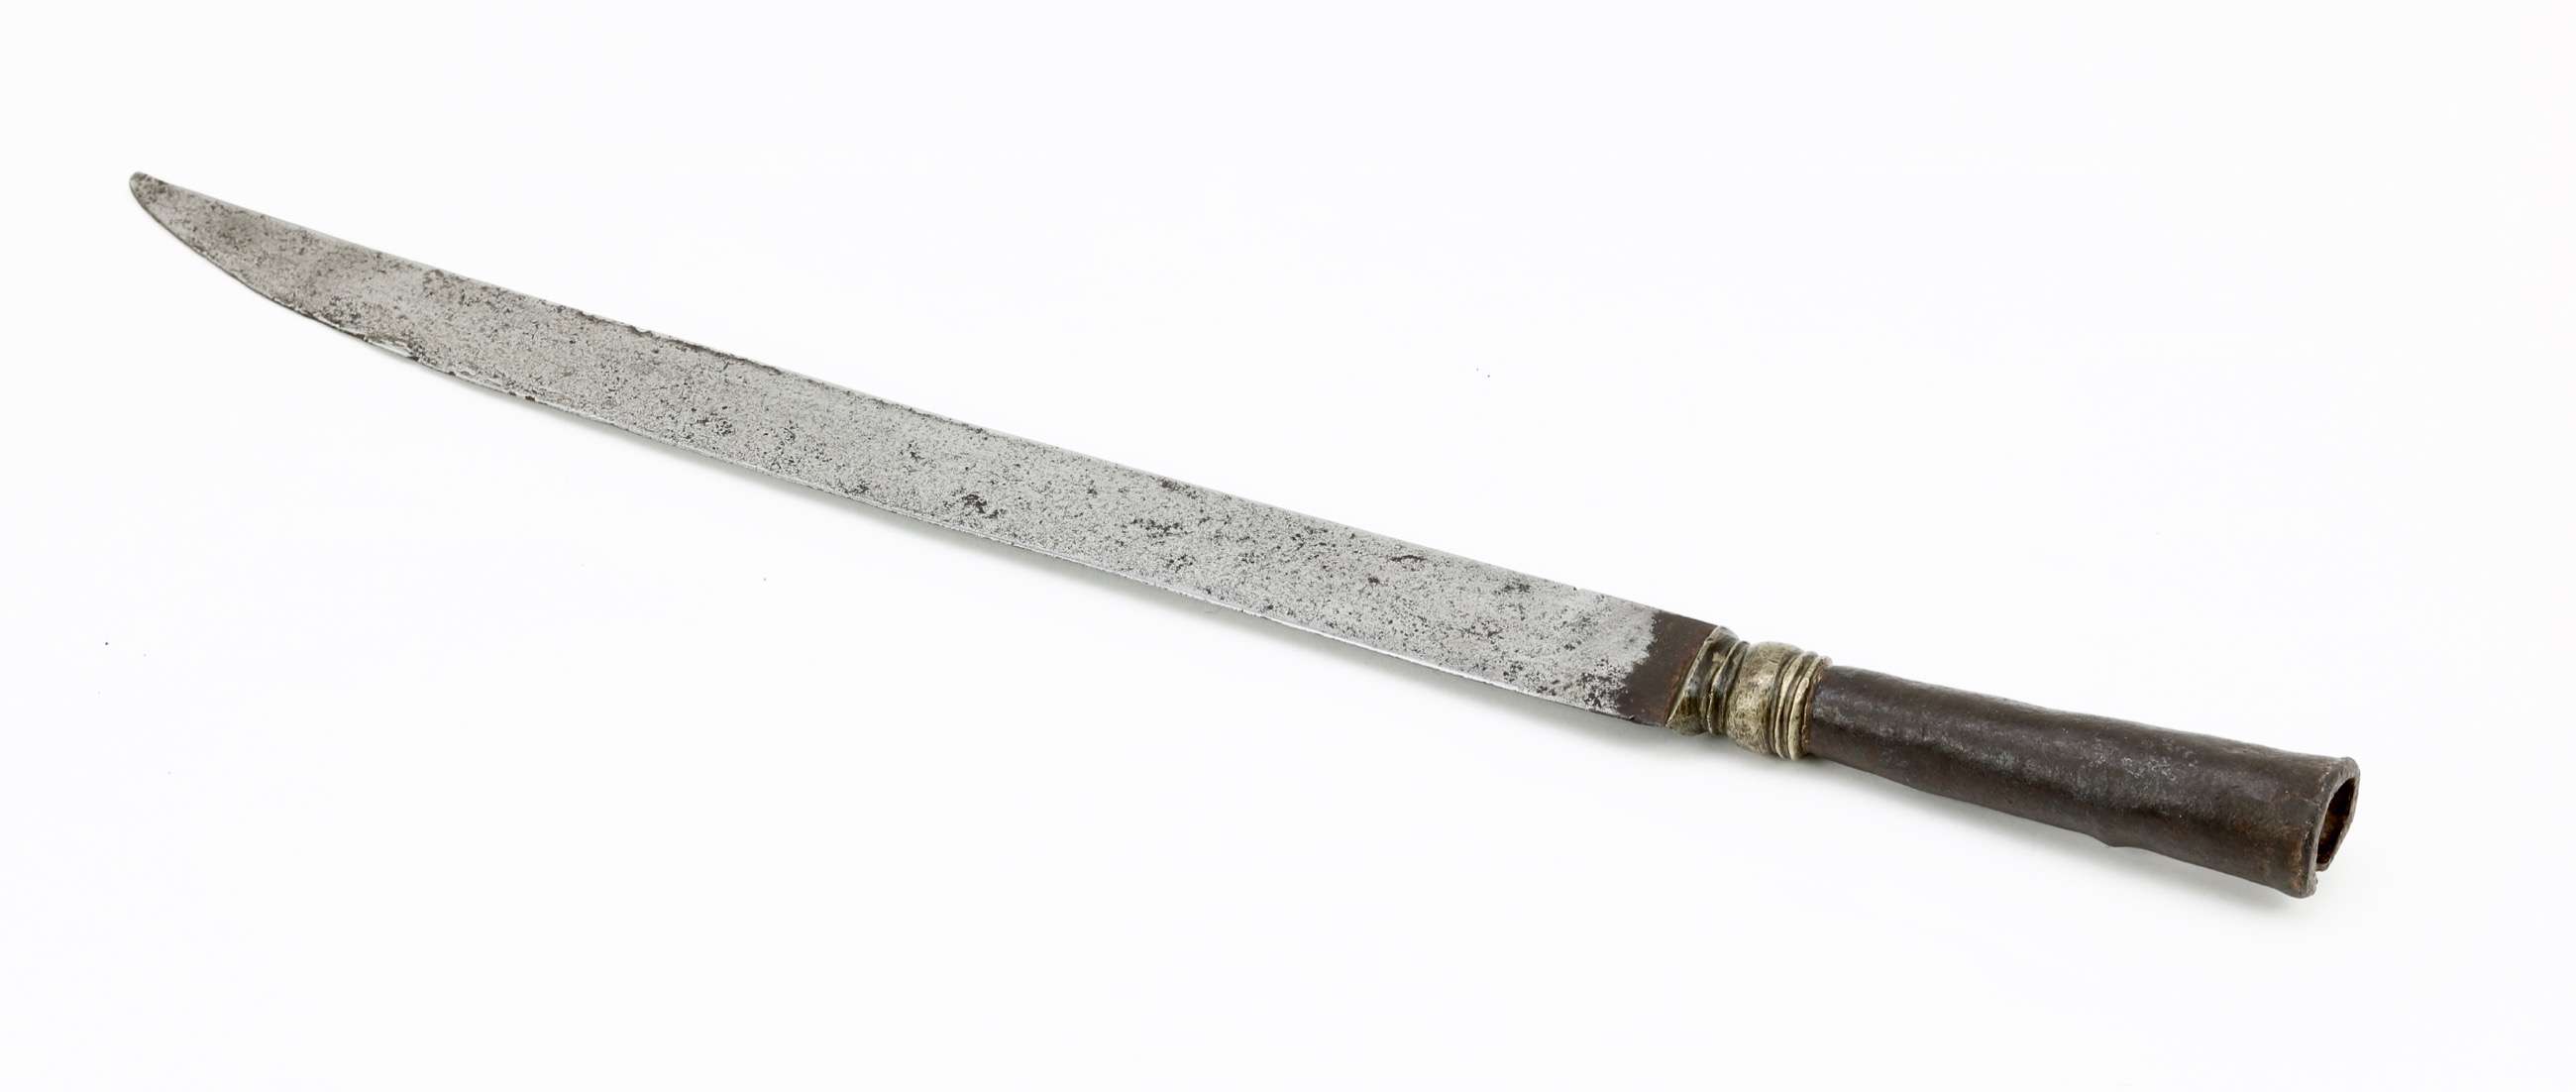 Qing curved pole arm head